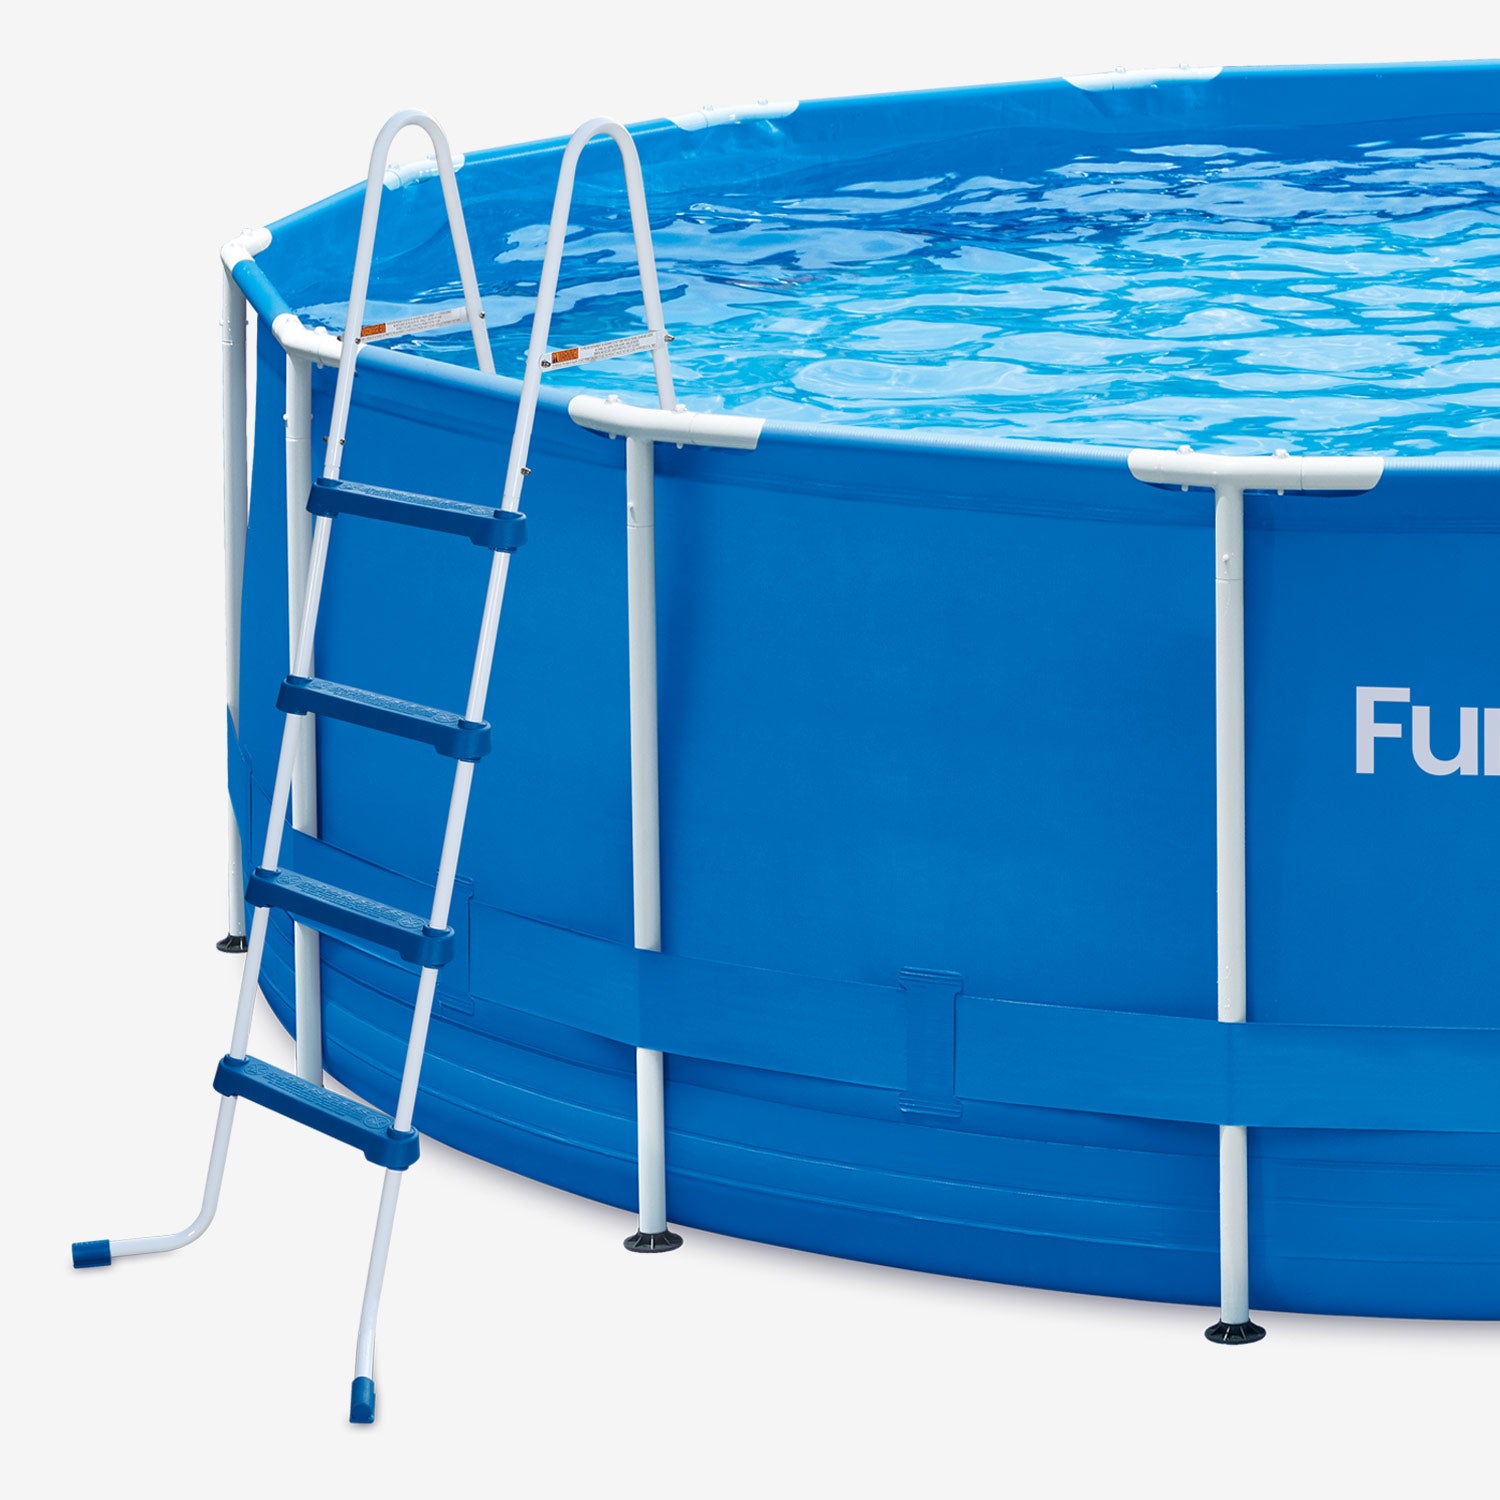 Funsicle 48" SureStep Ladder next to Funsicle Activity Pool